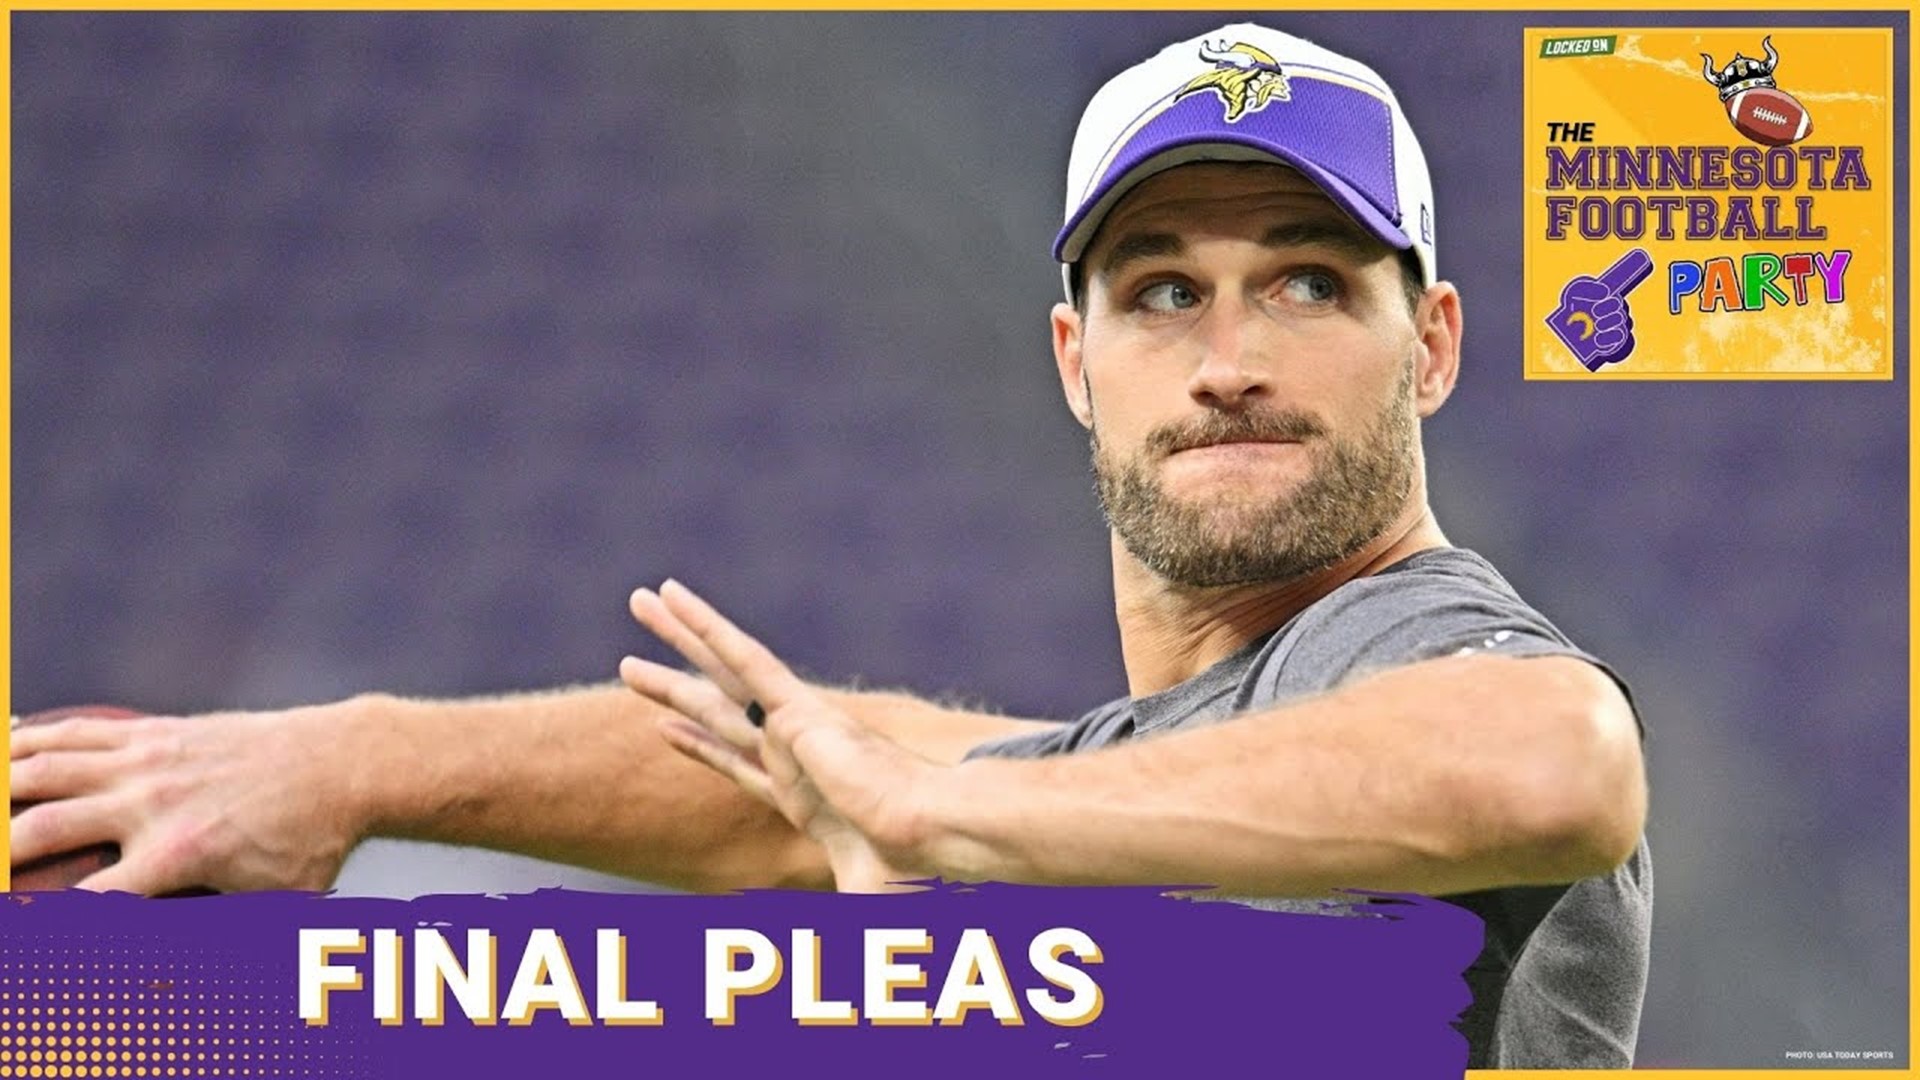 Final Arguments For Kirk Cousins' Future as a Minnesota Viking - The Minnesota Football Party